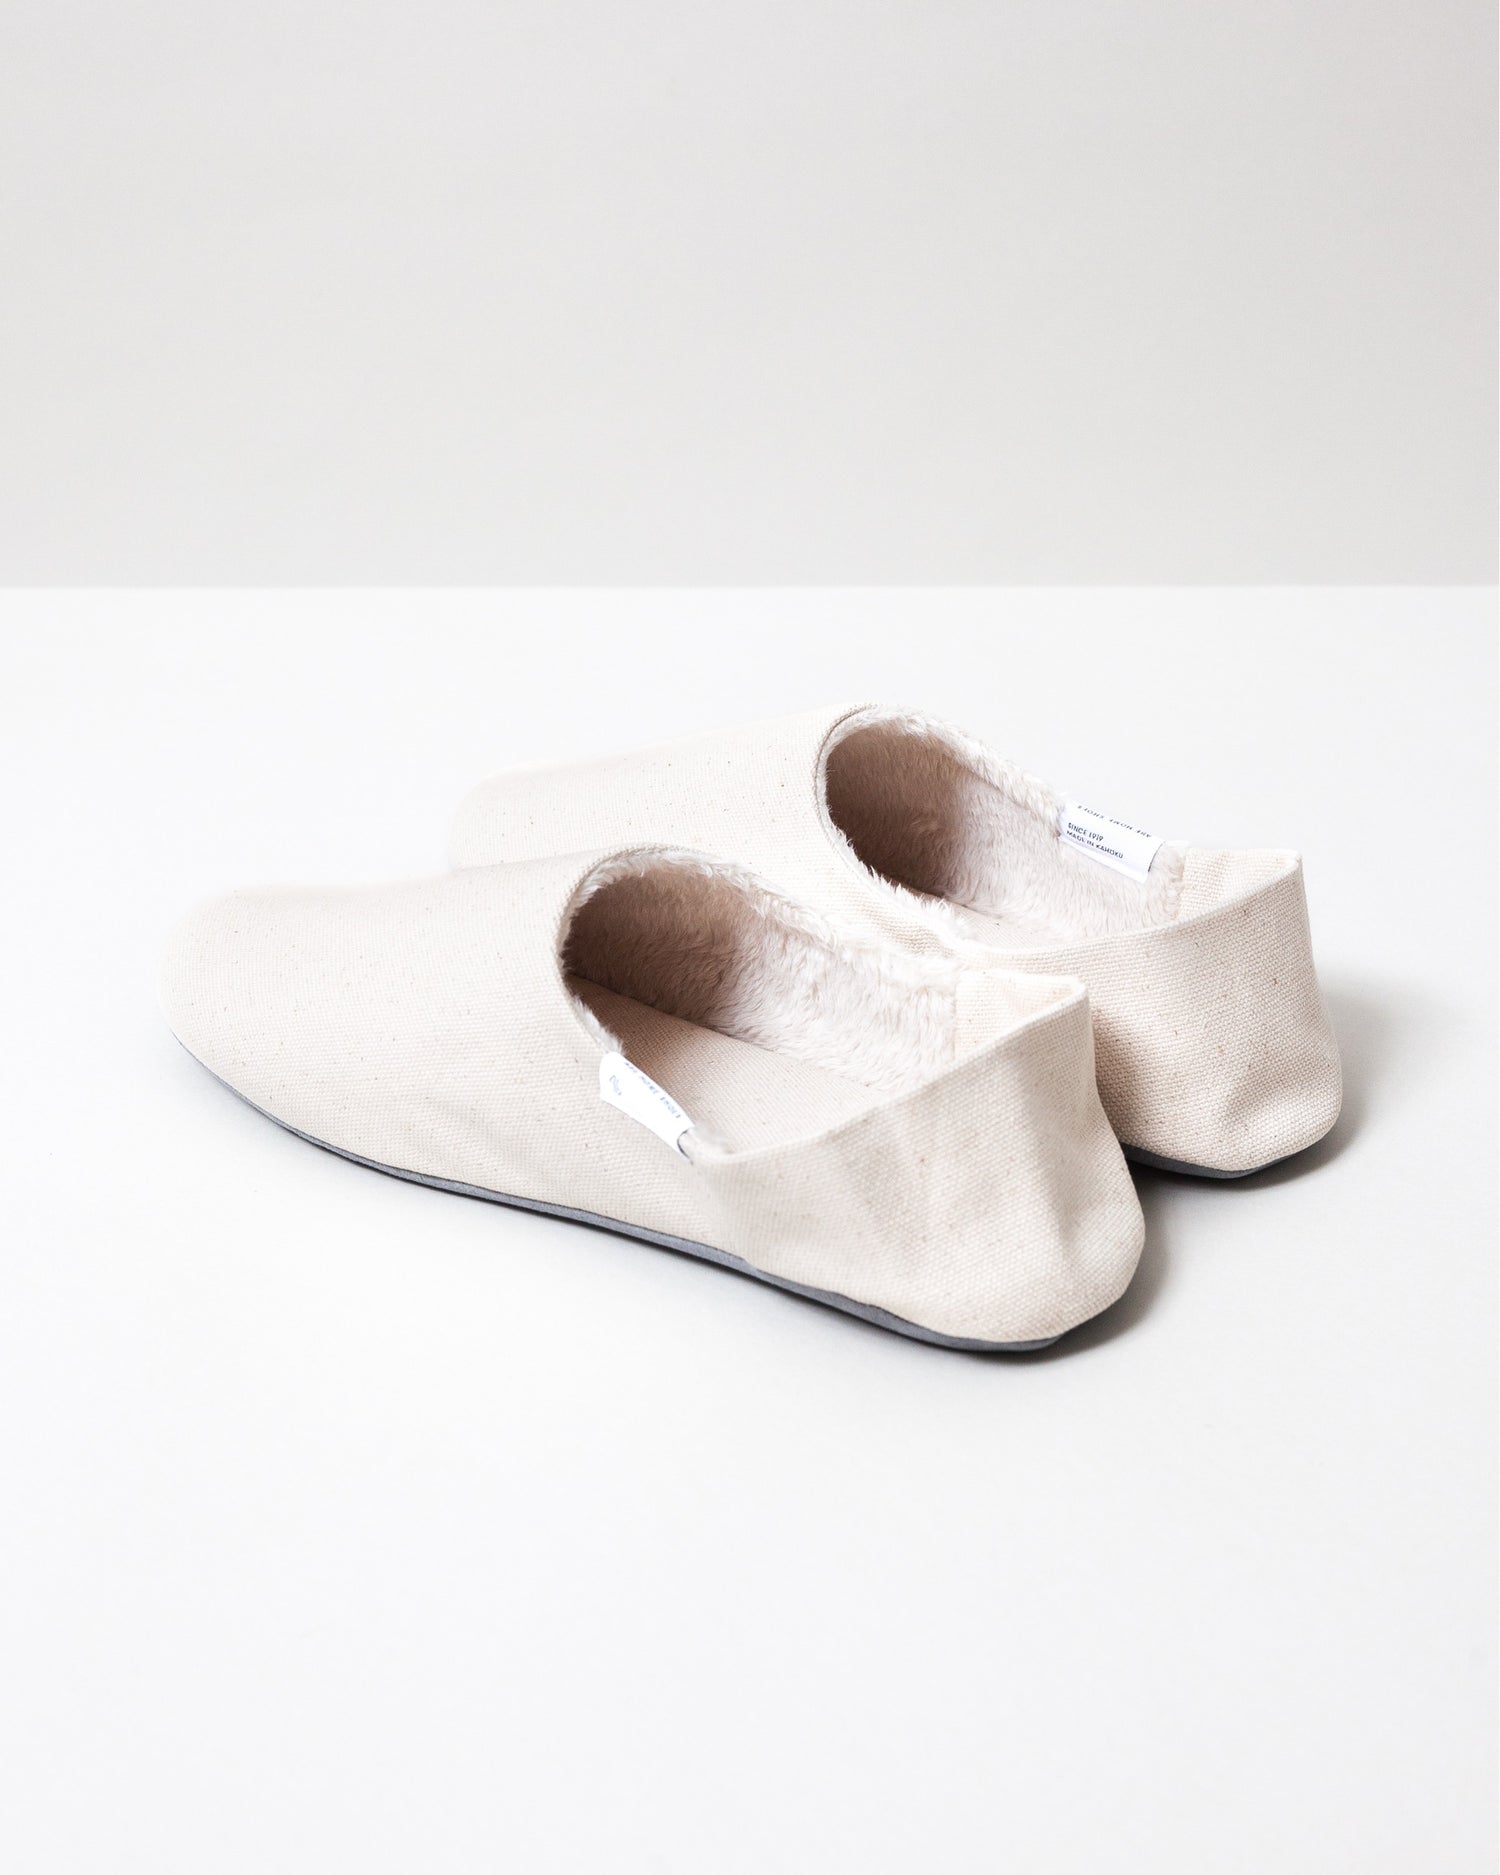 ABE Canvas Home Shoes - Wool-Lined, Natural